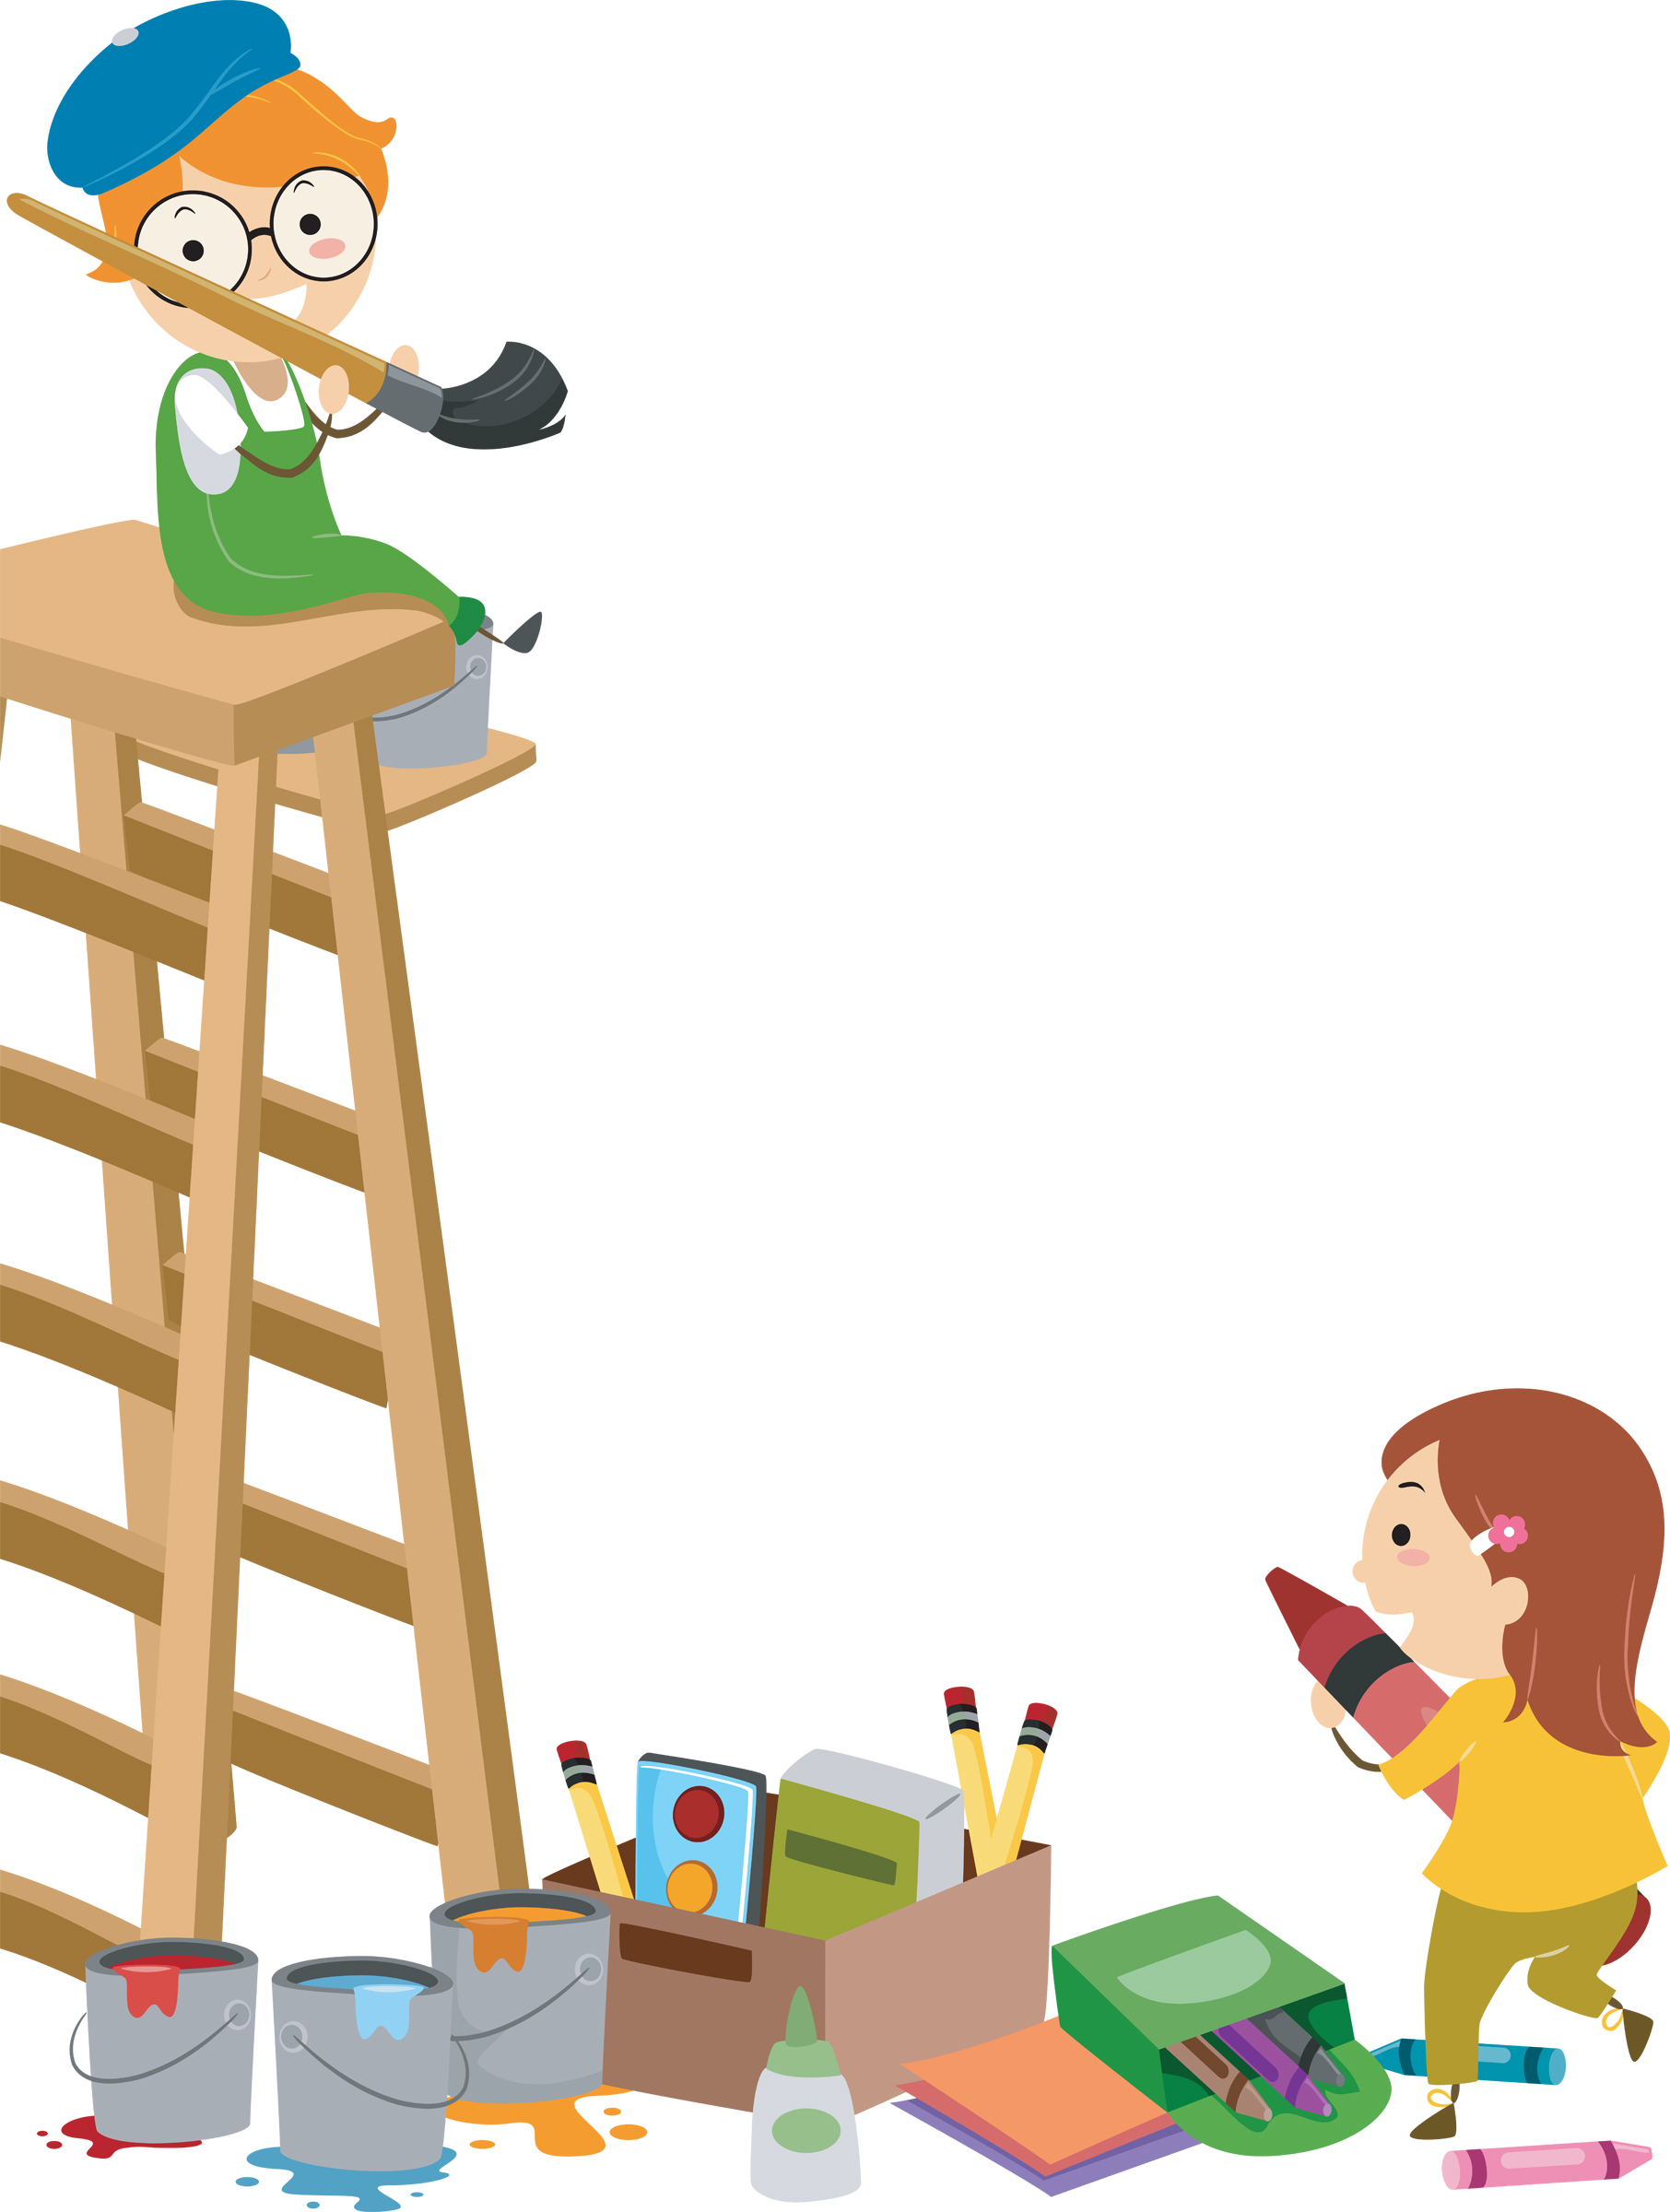 Boy with paint brush on ladder and girl with crayon.